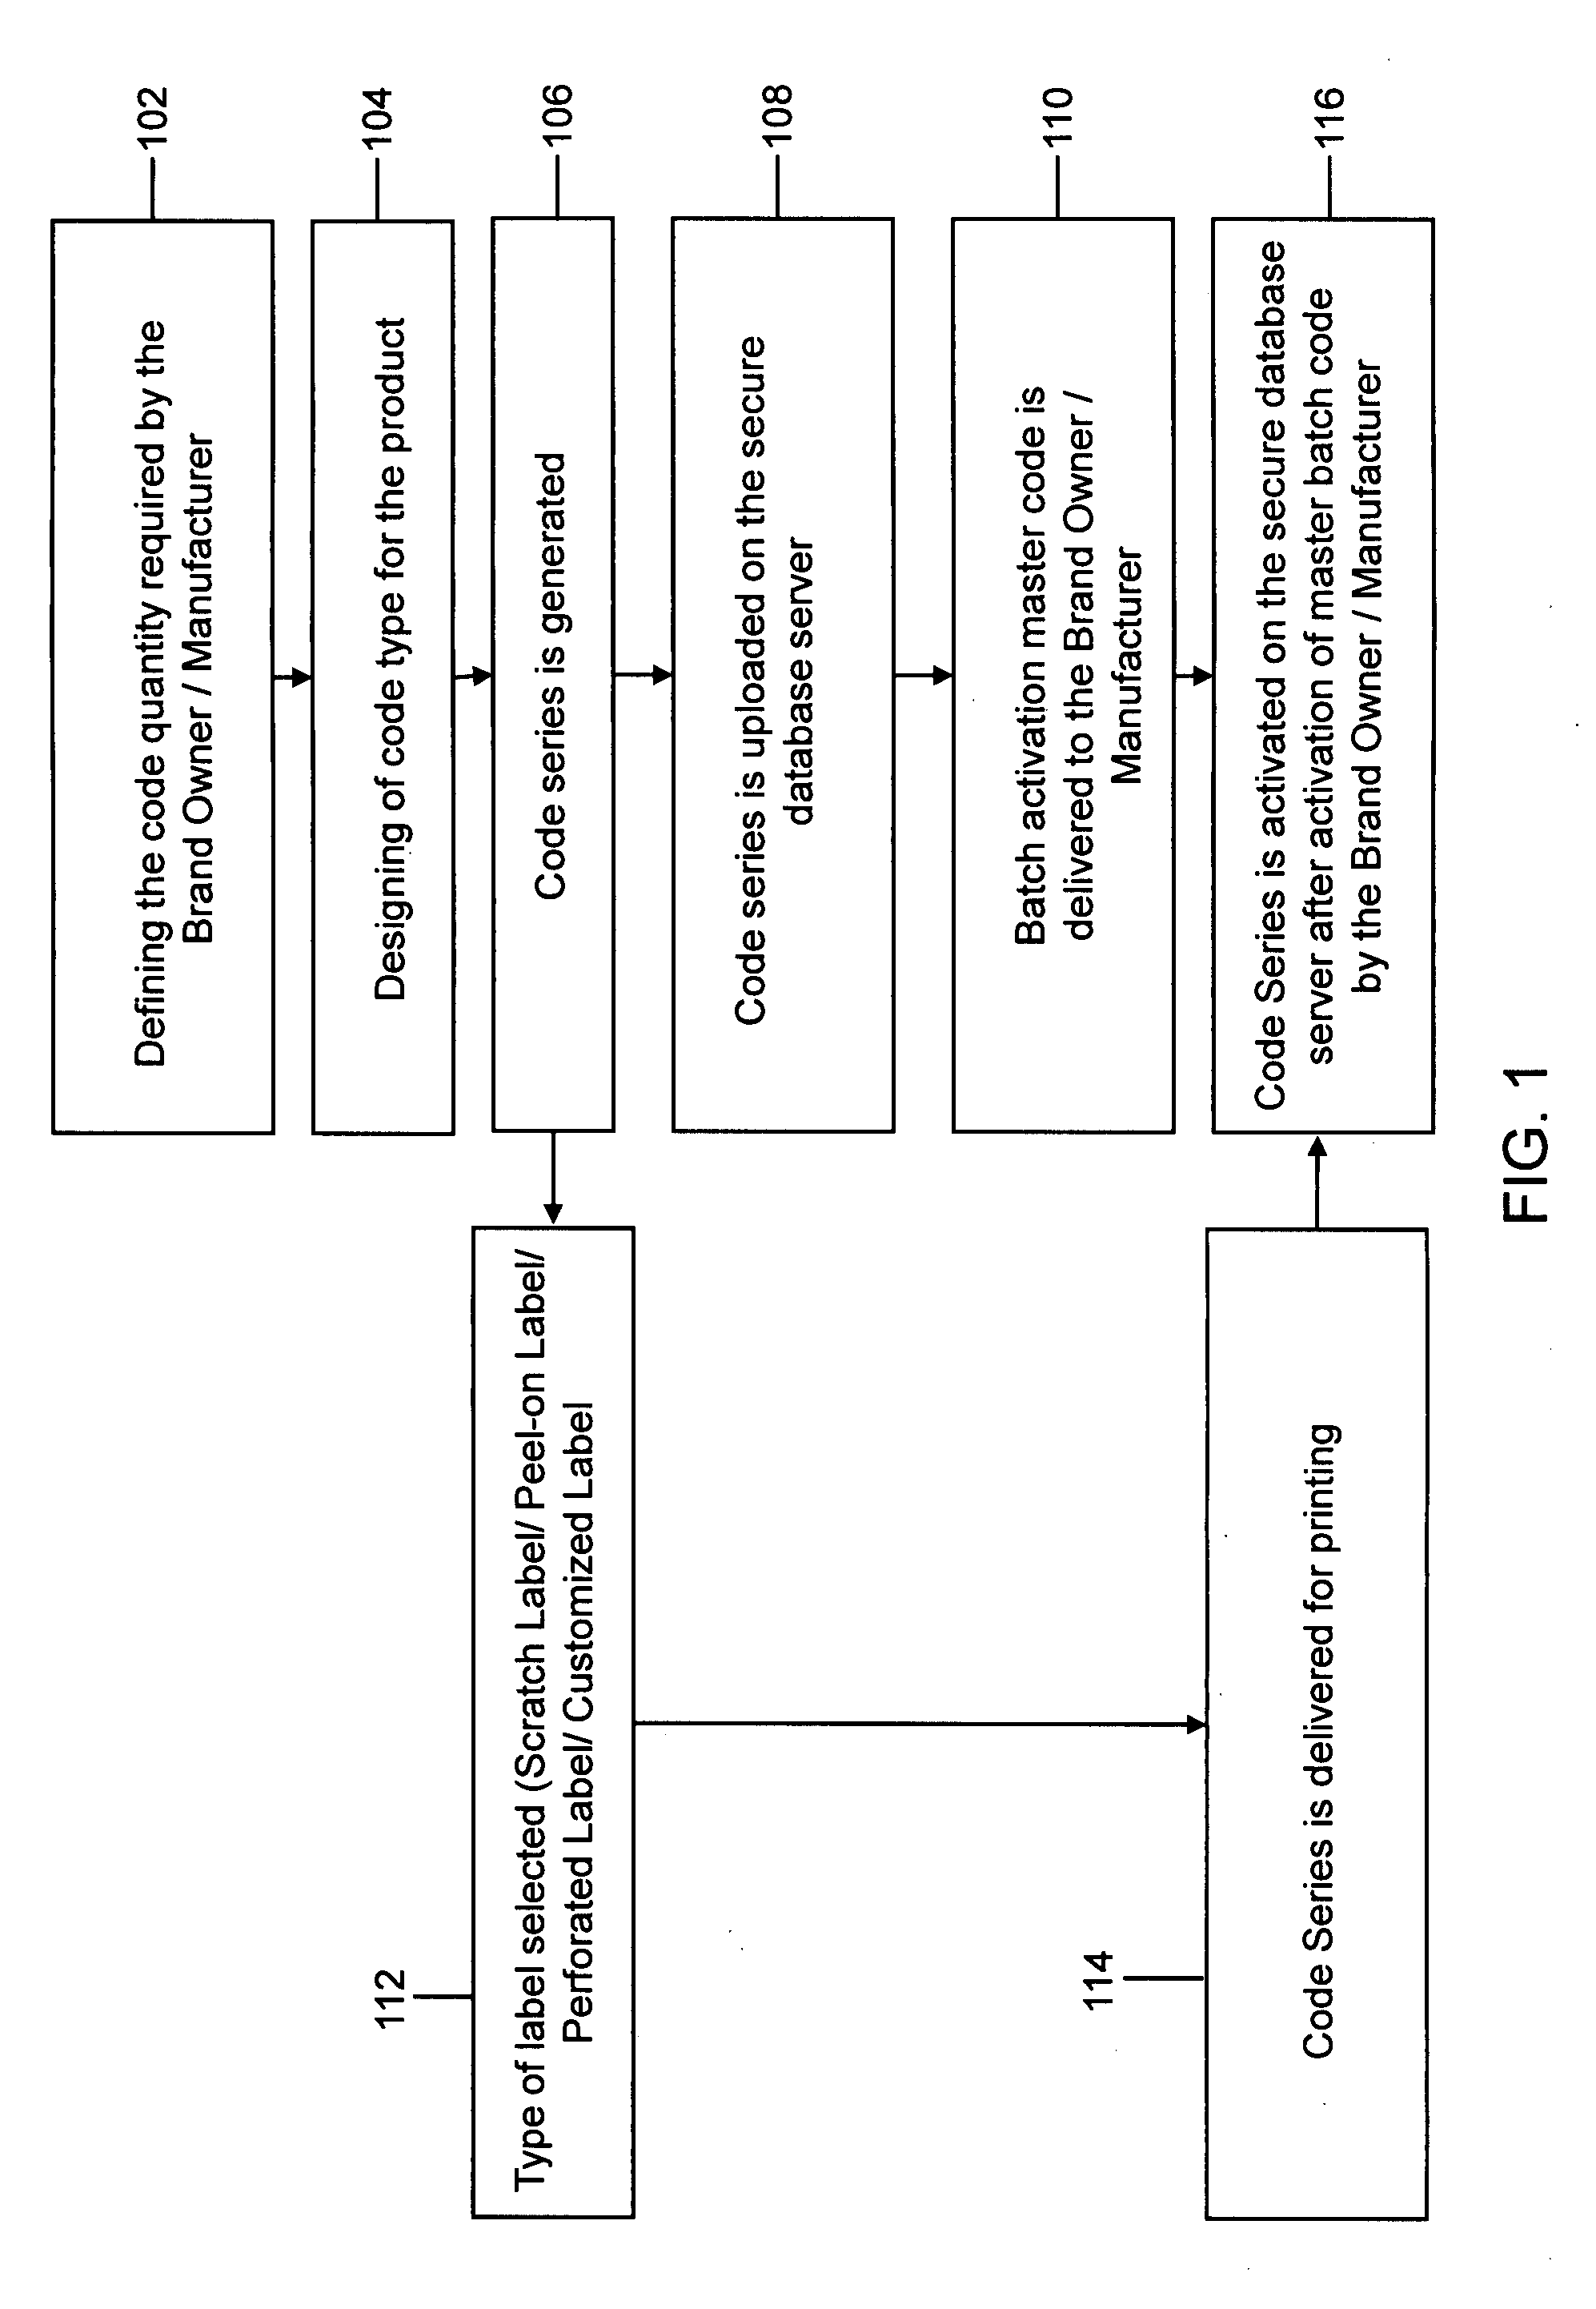 Anti-counterfeiting system and method for conducting retail analysis